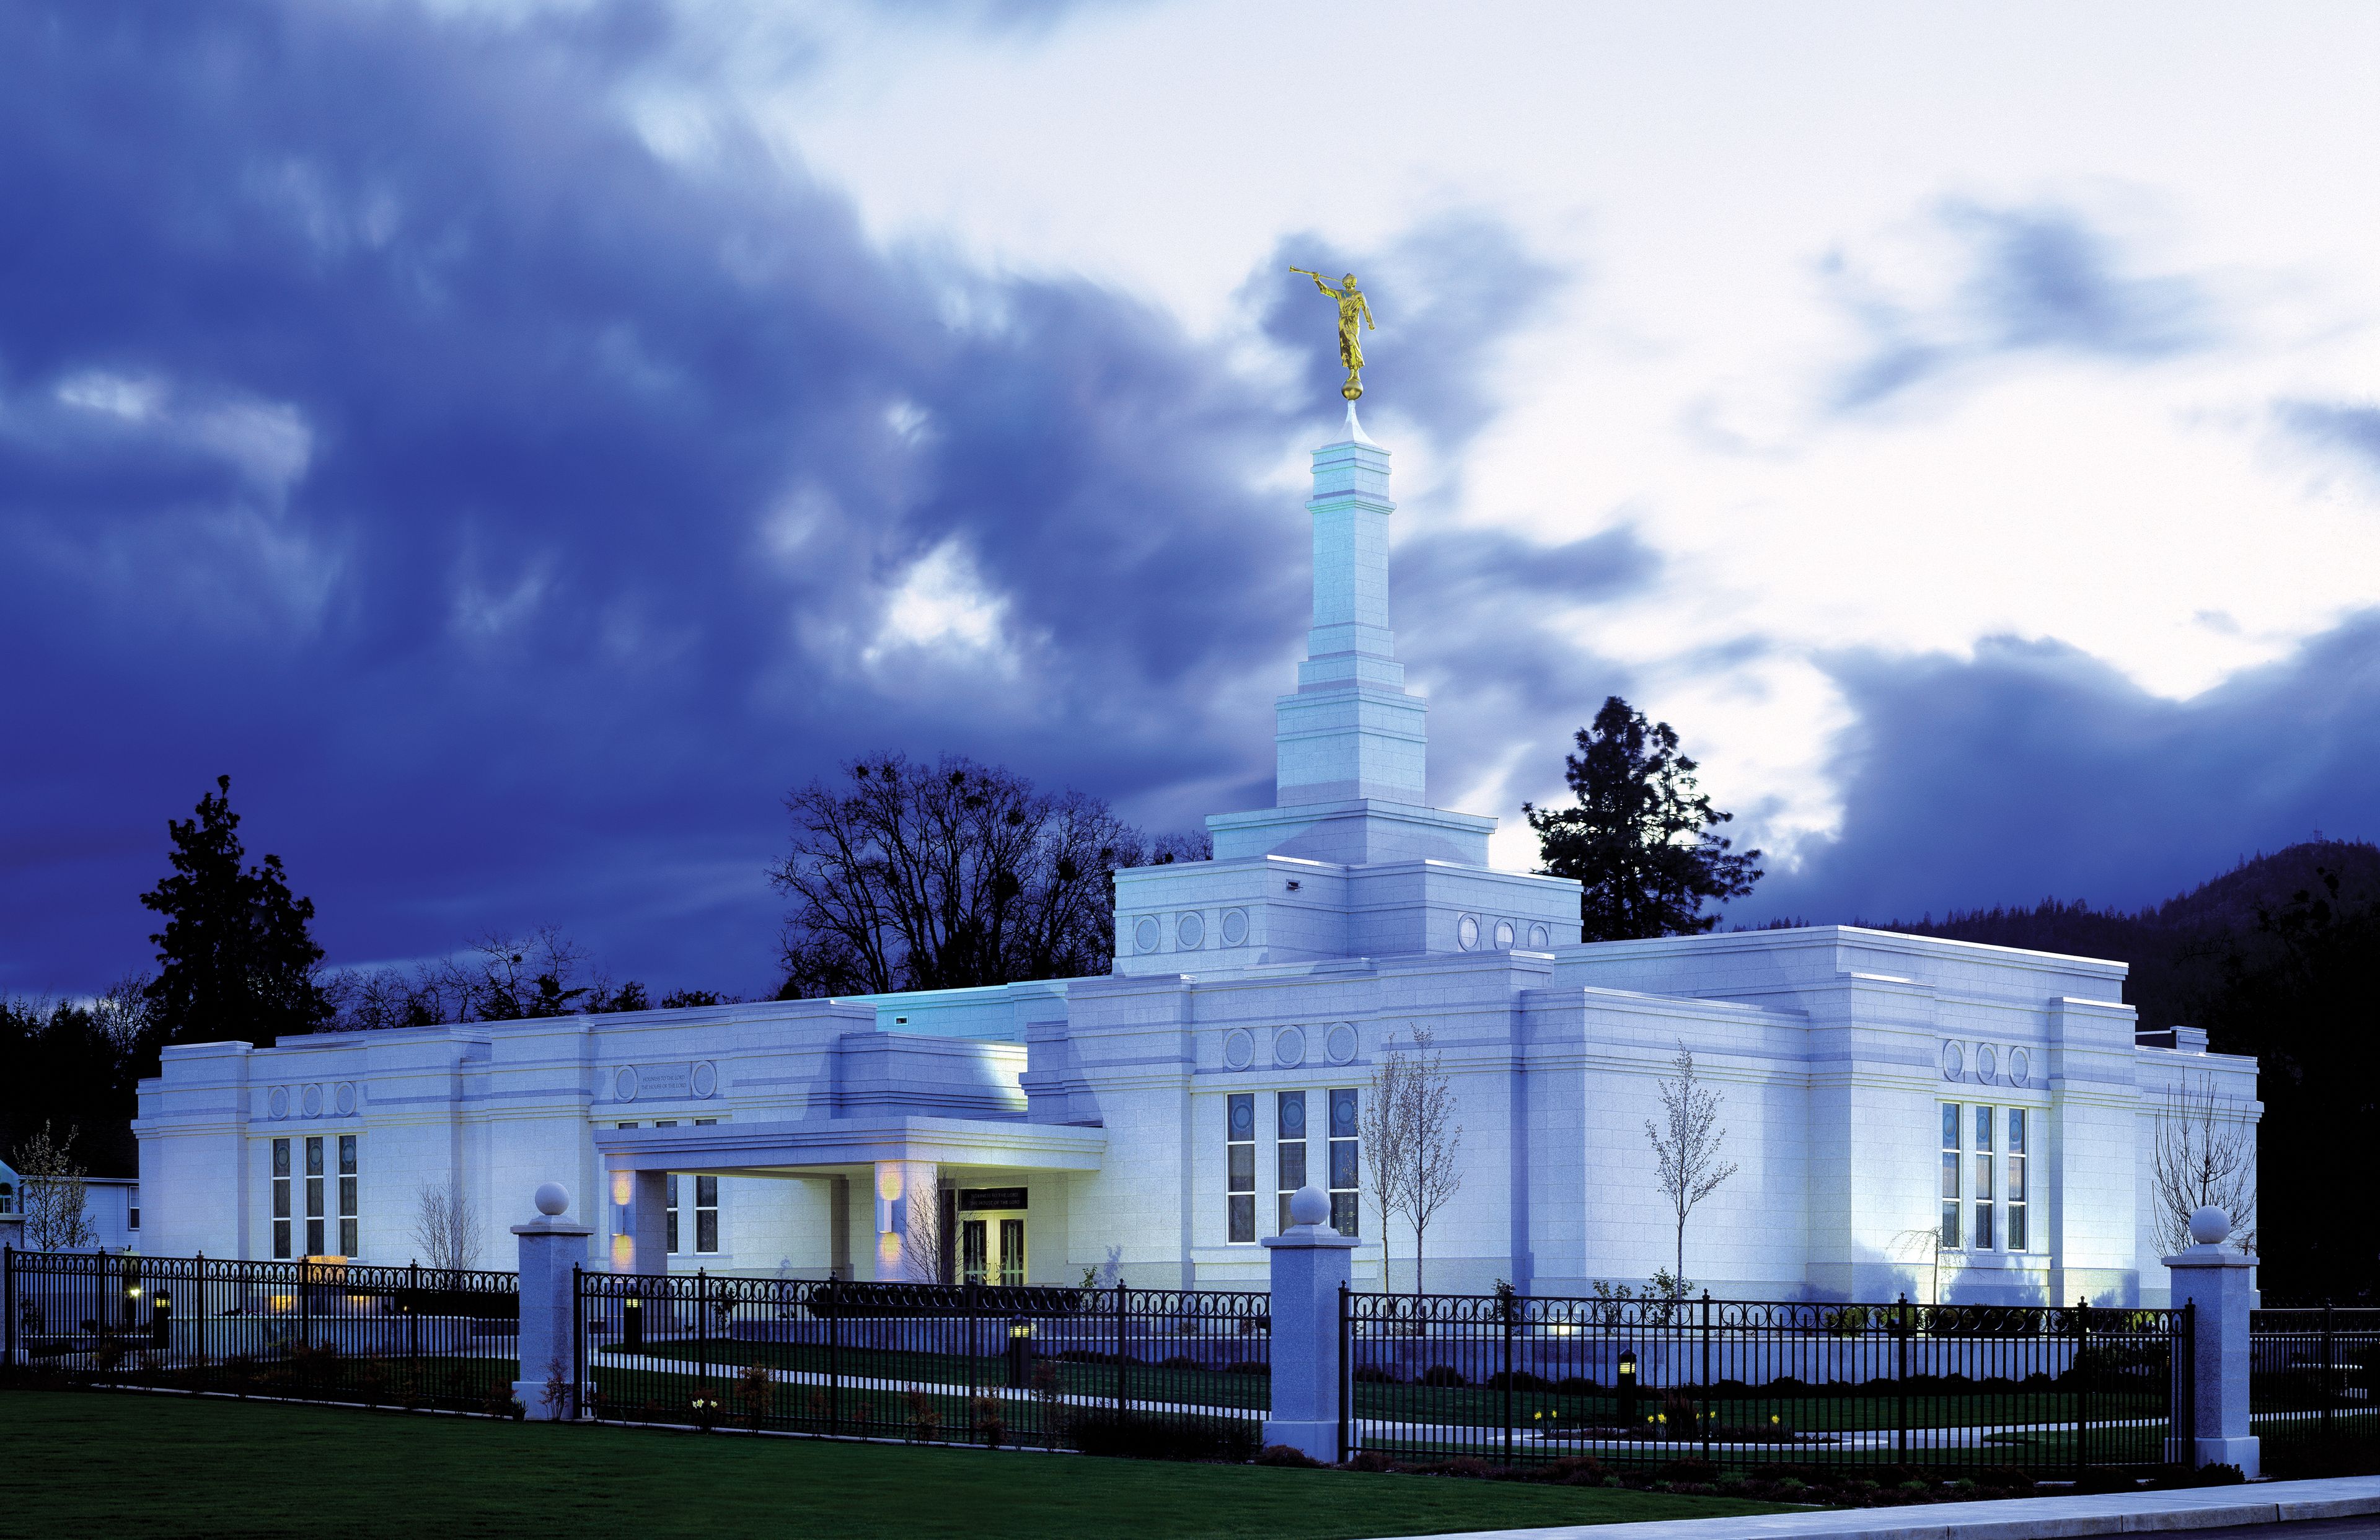 The Medford Oregon Temple in the evening, including the entrance and scenery.